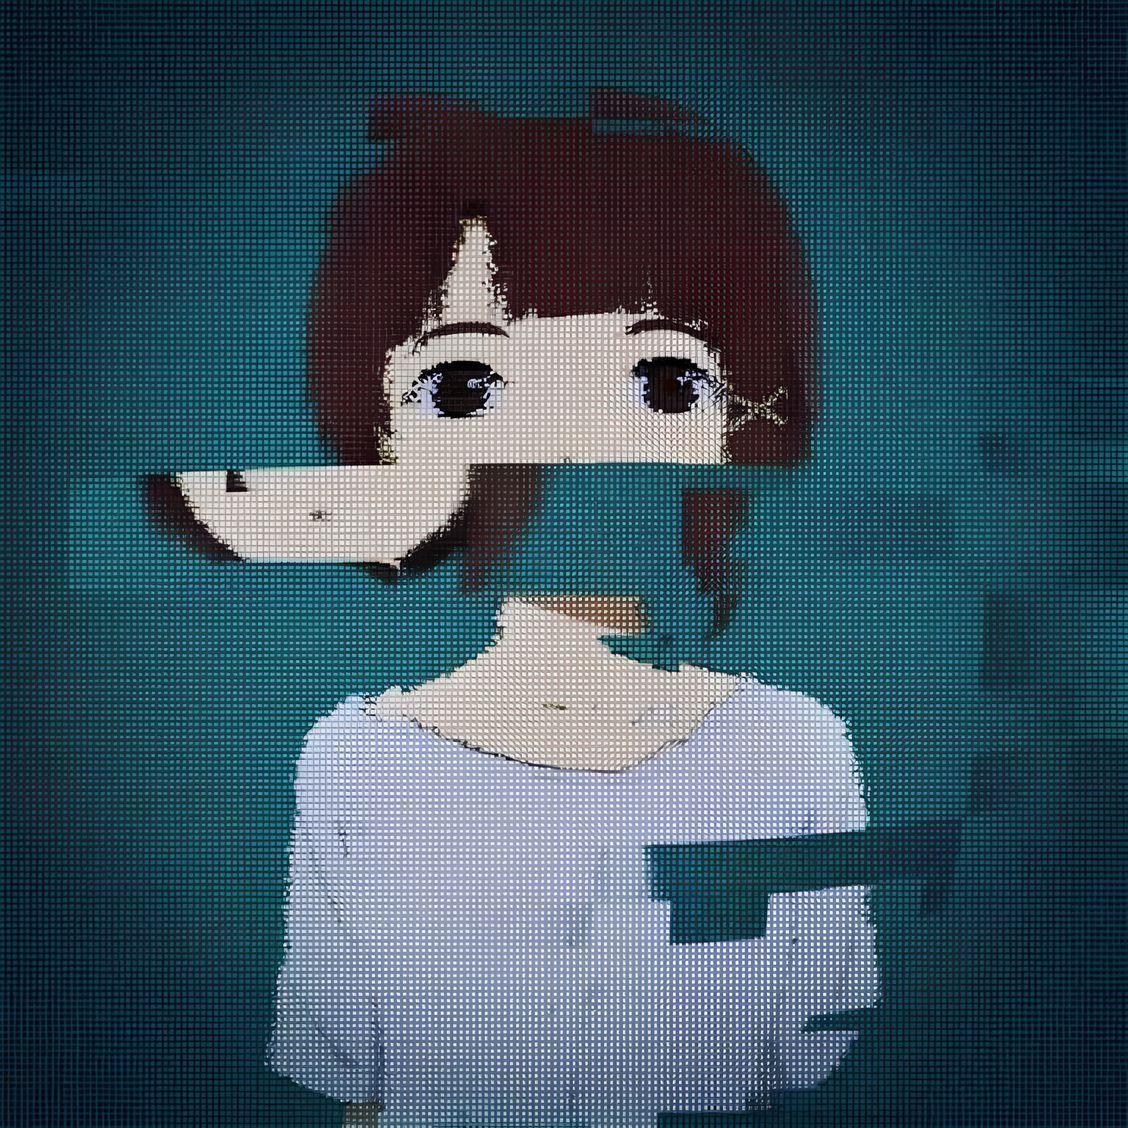 Player young_party avatar